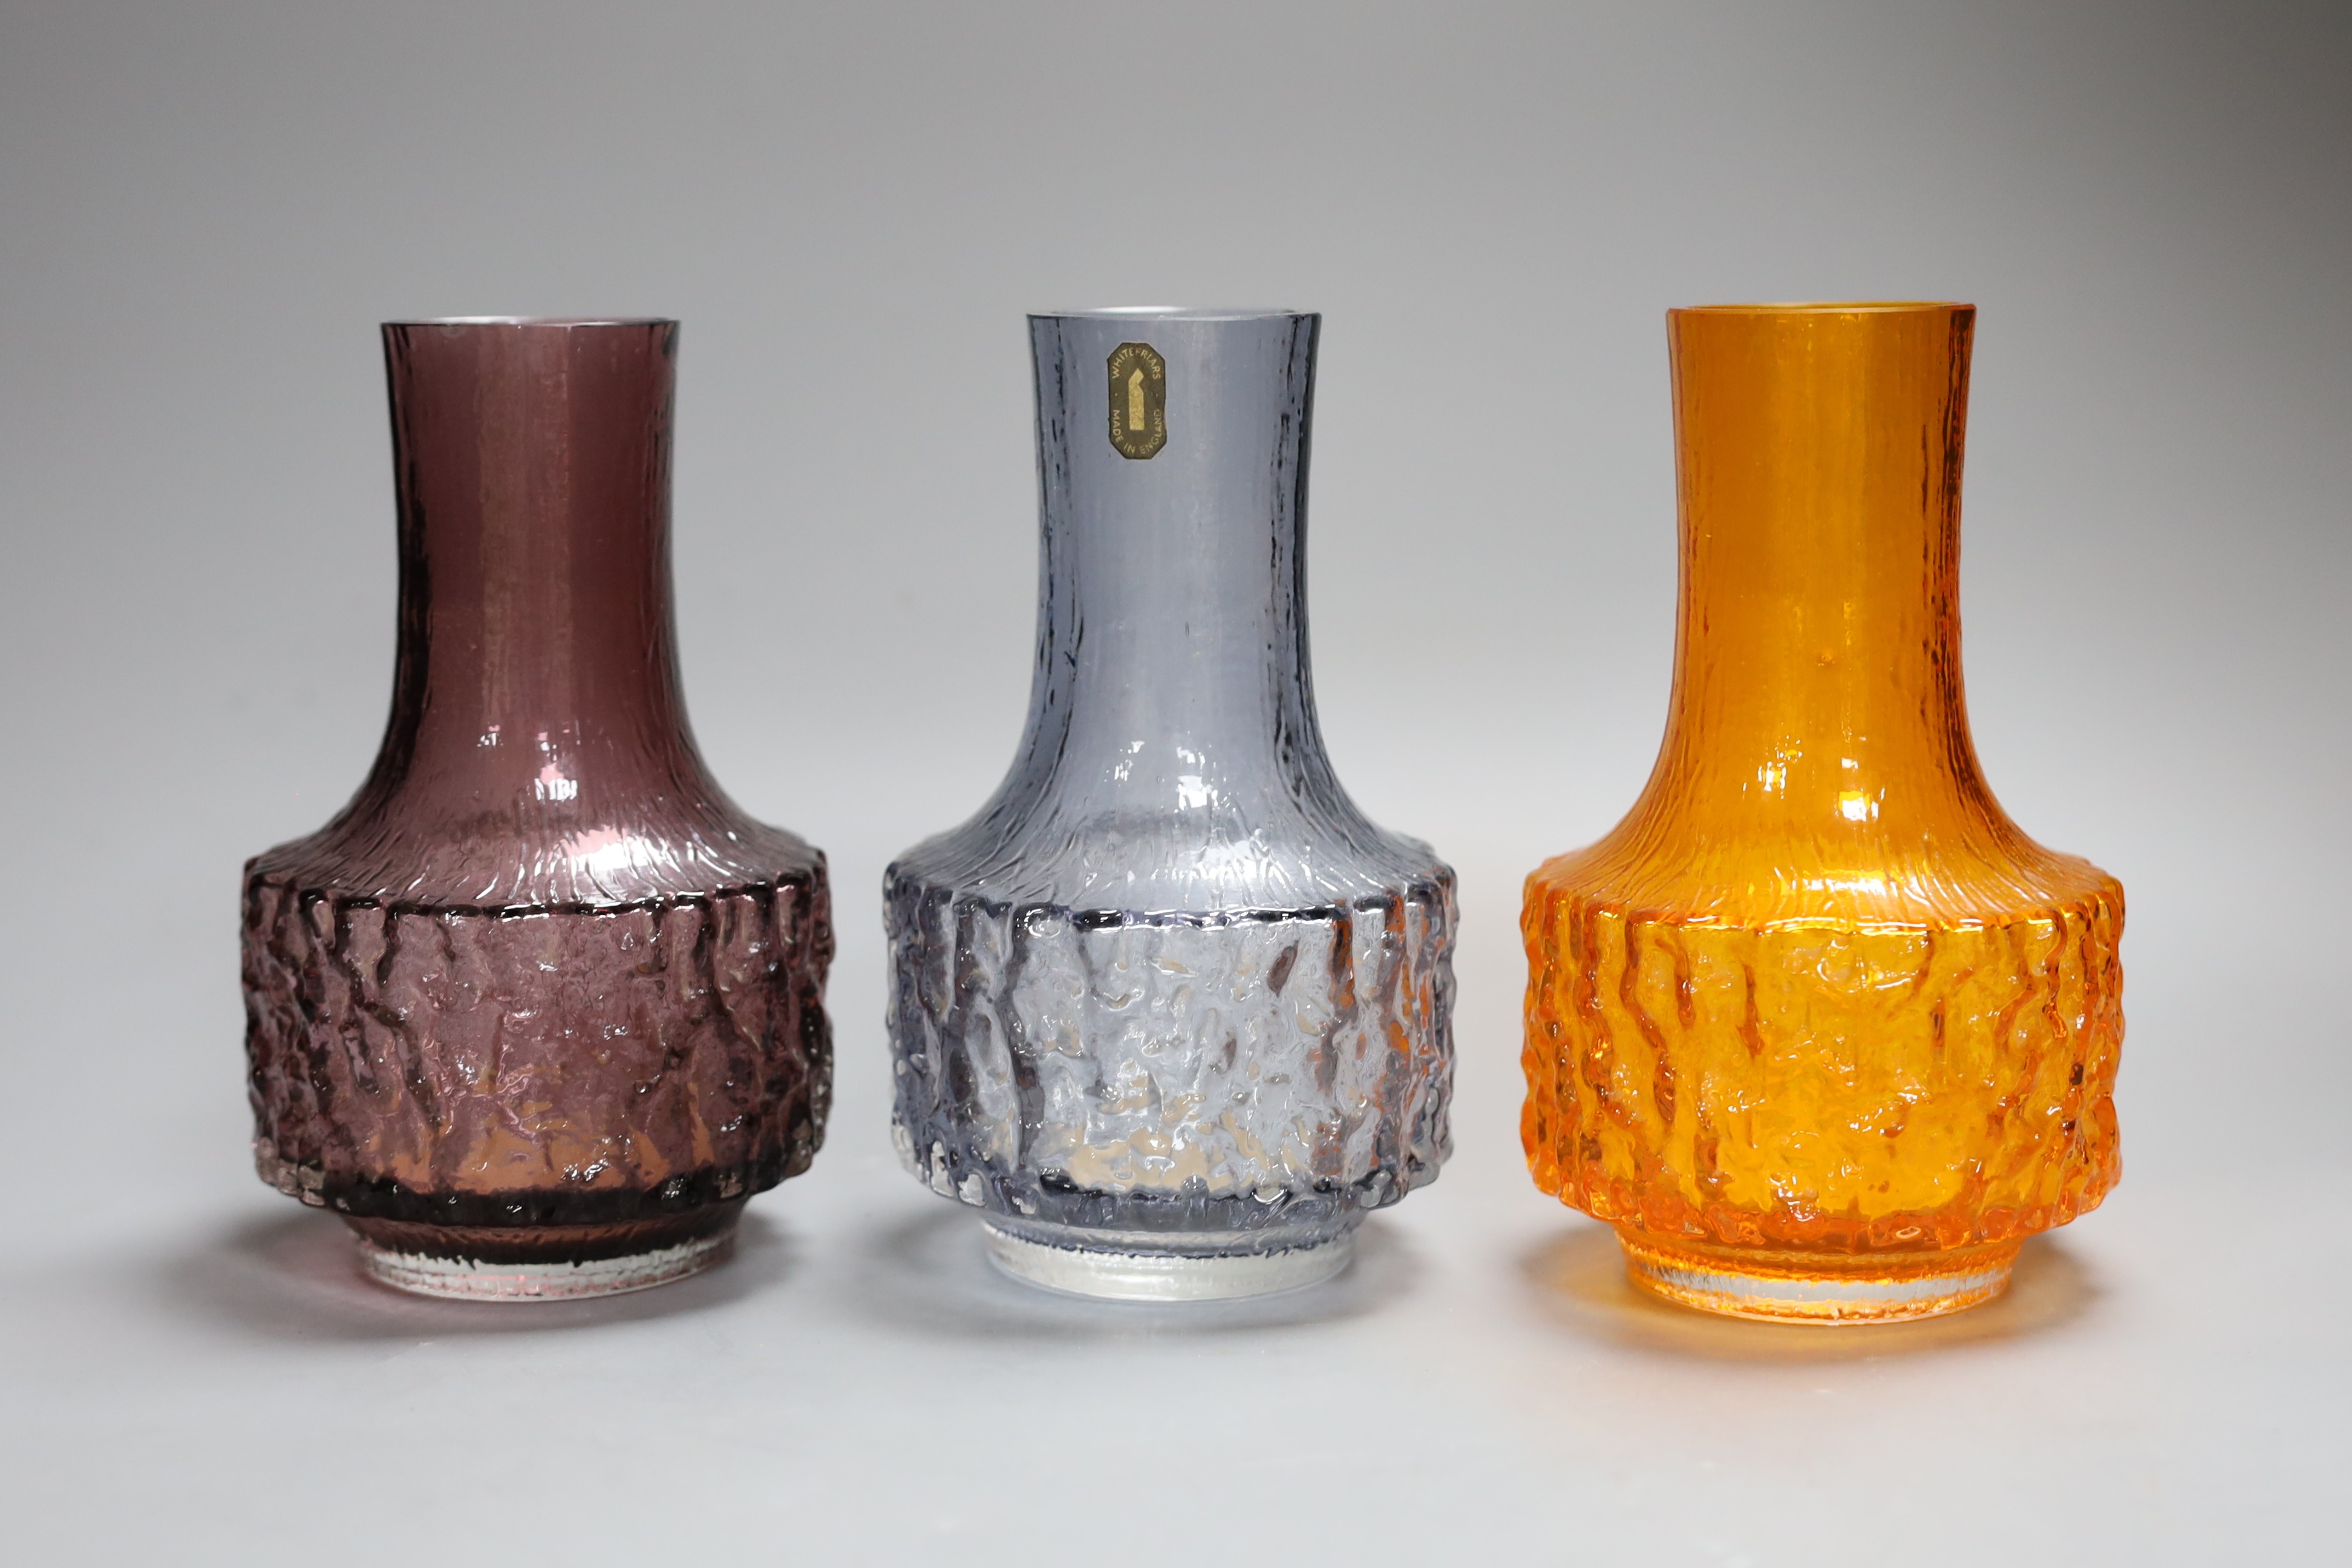 Three Whitefriars cylindrical bottle vases, in amethyst, tangerine and smoked glass, each 18cm high.